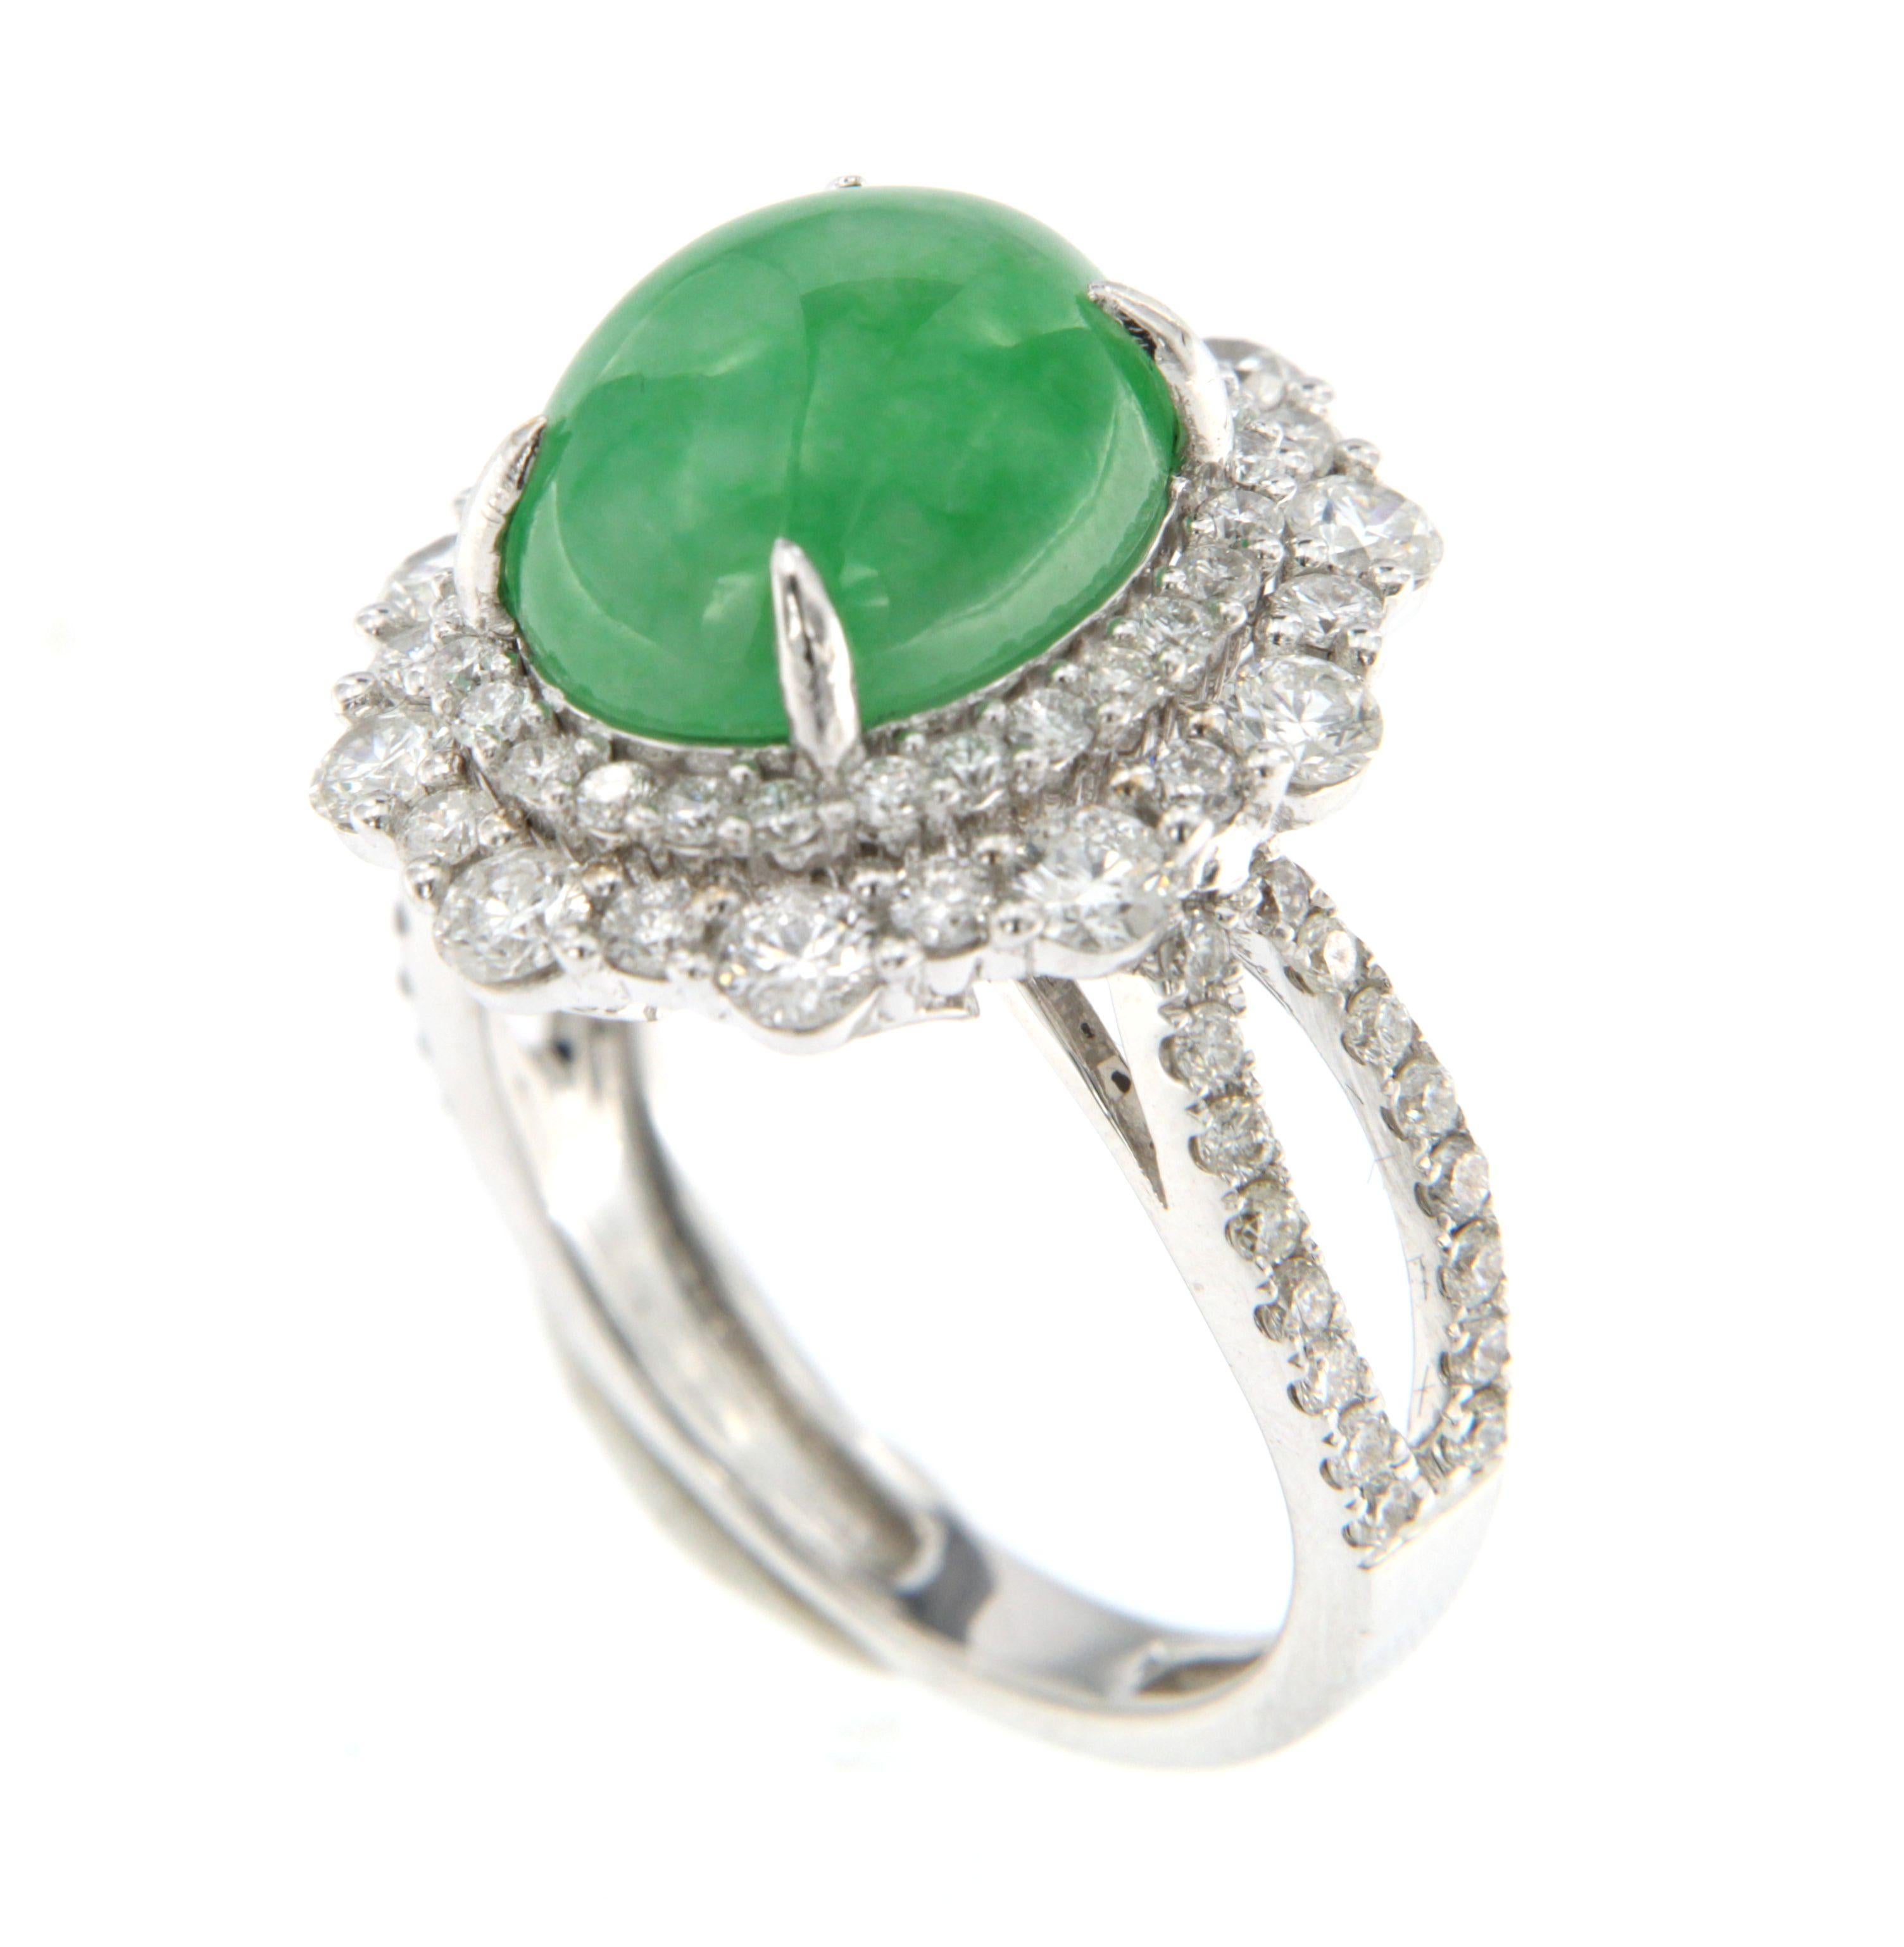 Contemporary Vintage 5.95Ct Jadeite and Diamond Ring in 18 Karat White Gold For Sale